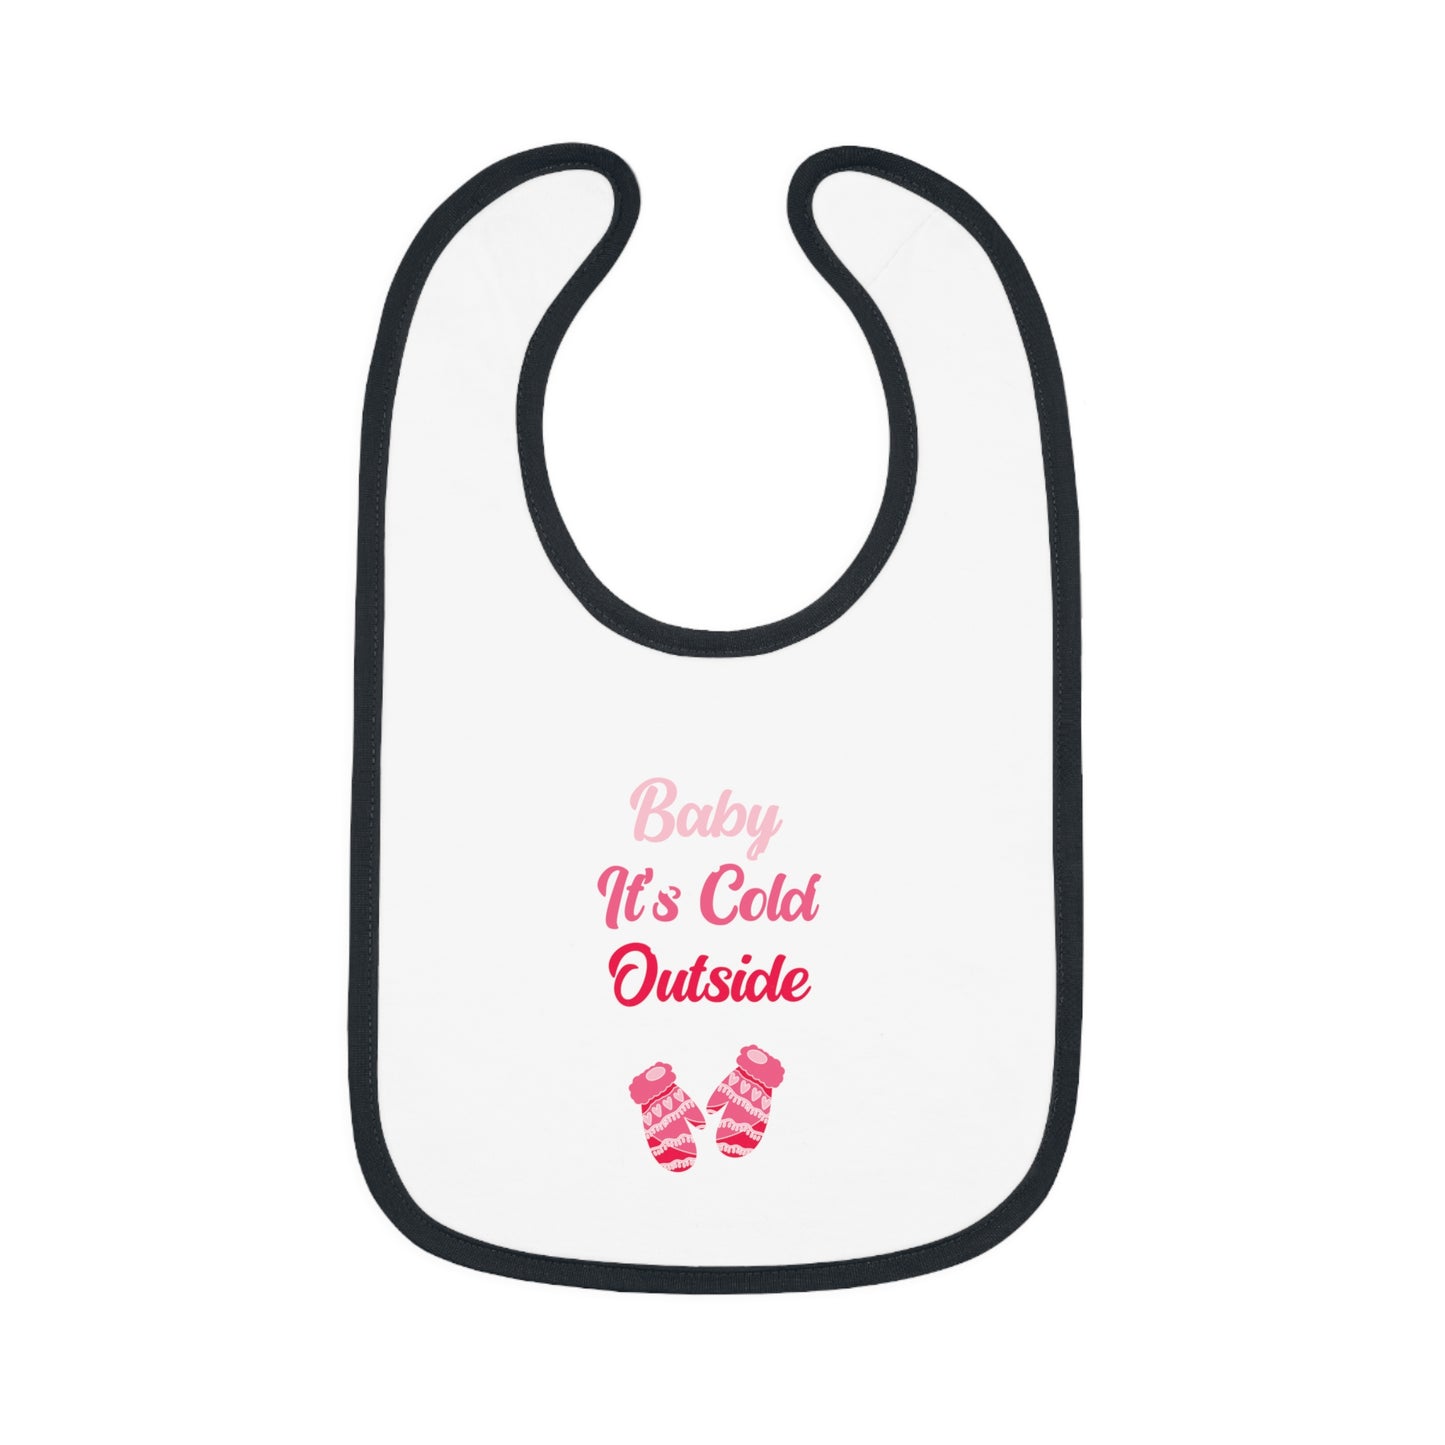 Baby Bib - "Baby It's Cold Outside" Baby Contrast Trim Jersey Bib, Comes in 3 Different Colors